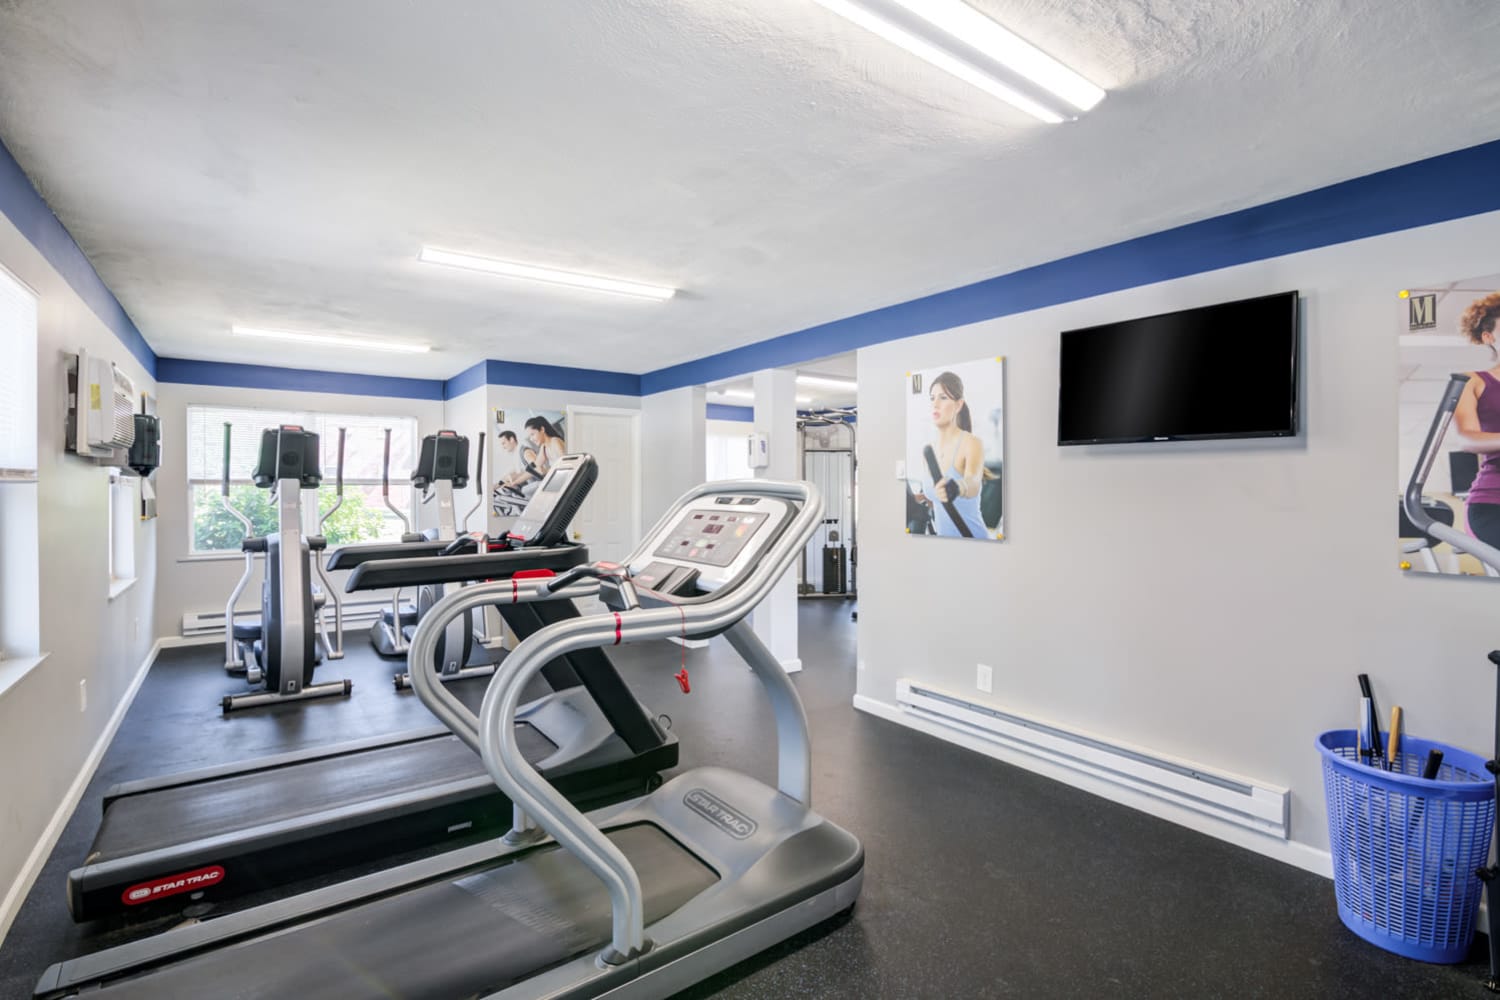 Fitness center with cardio machines at Eatoncrest Apartment Homes in Eatontown, New Jersey